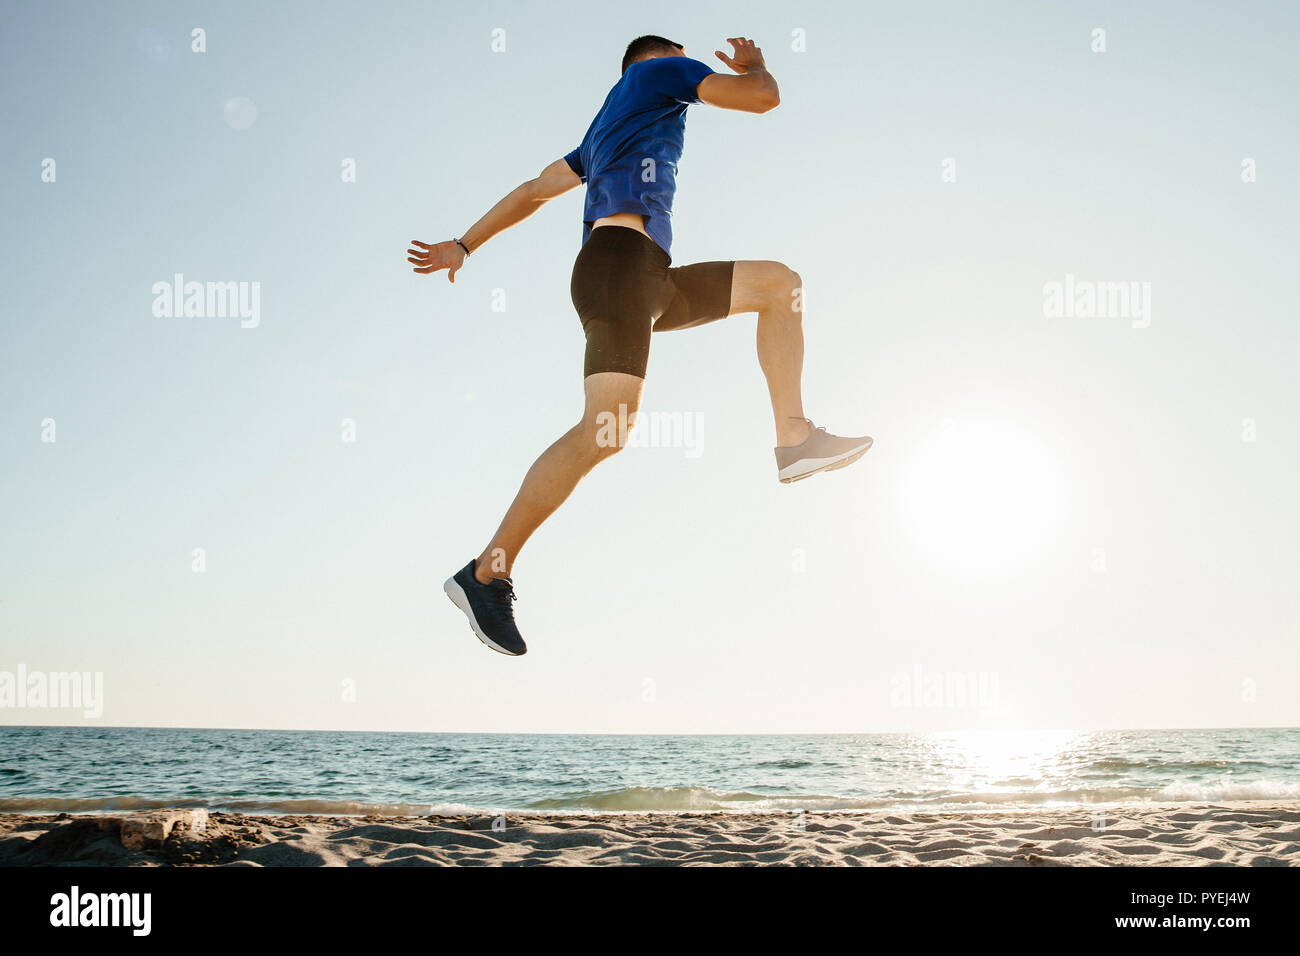 male athlete jump up and flying in sunlight on beach Stock Photo